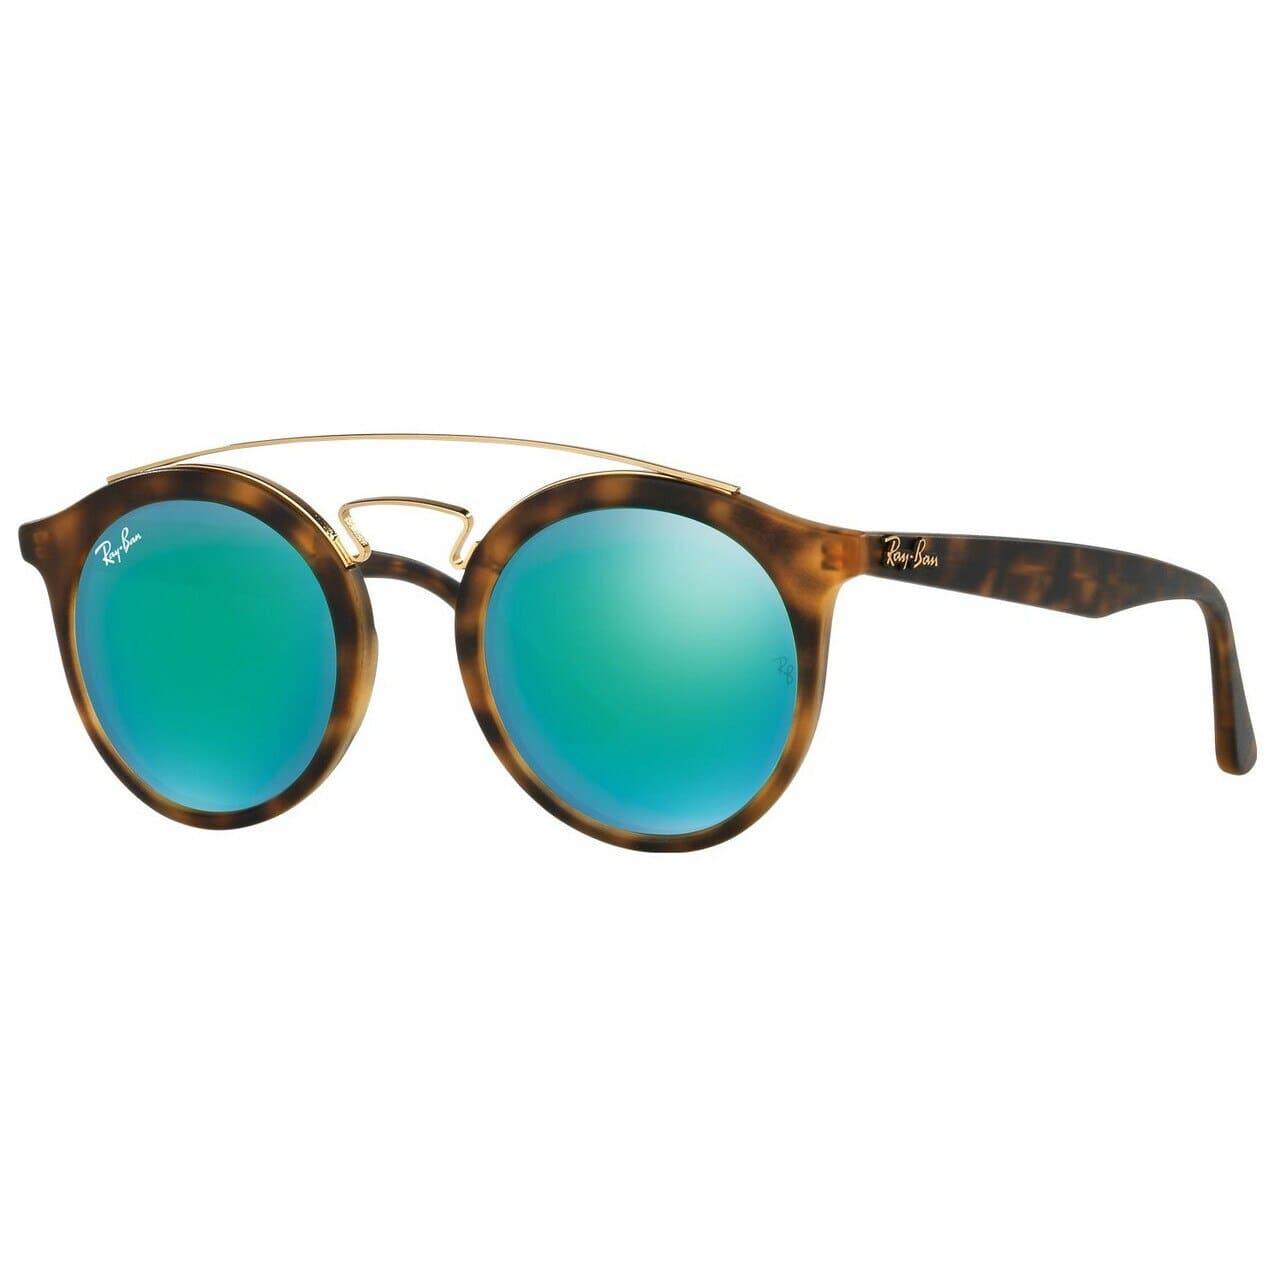 Ray-Ban RB4256 60923R Gatsby I Sunglasses Tortoise / Gold Frame With Green Mirror Lens 8053672584332